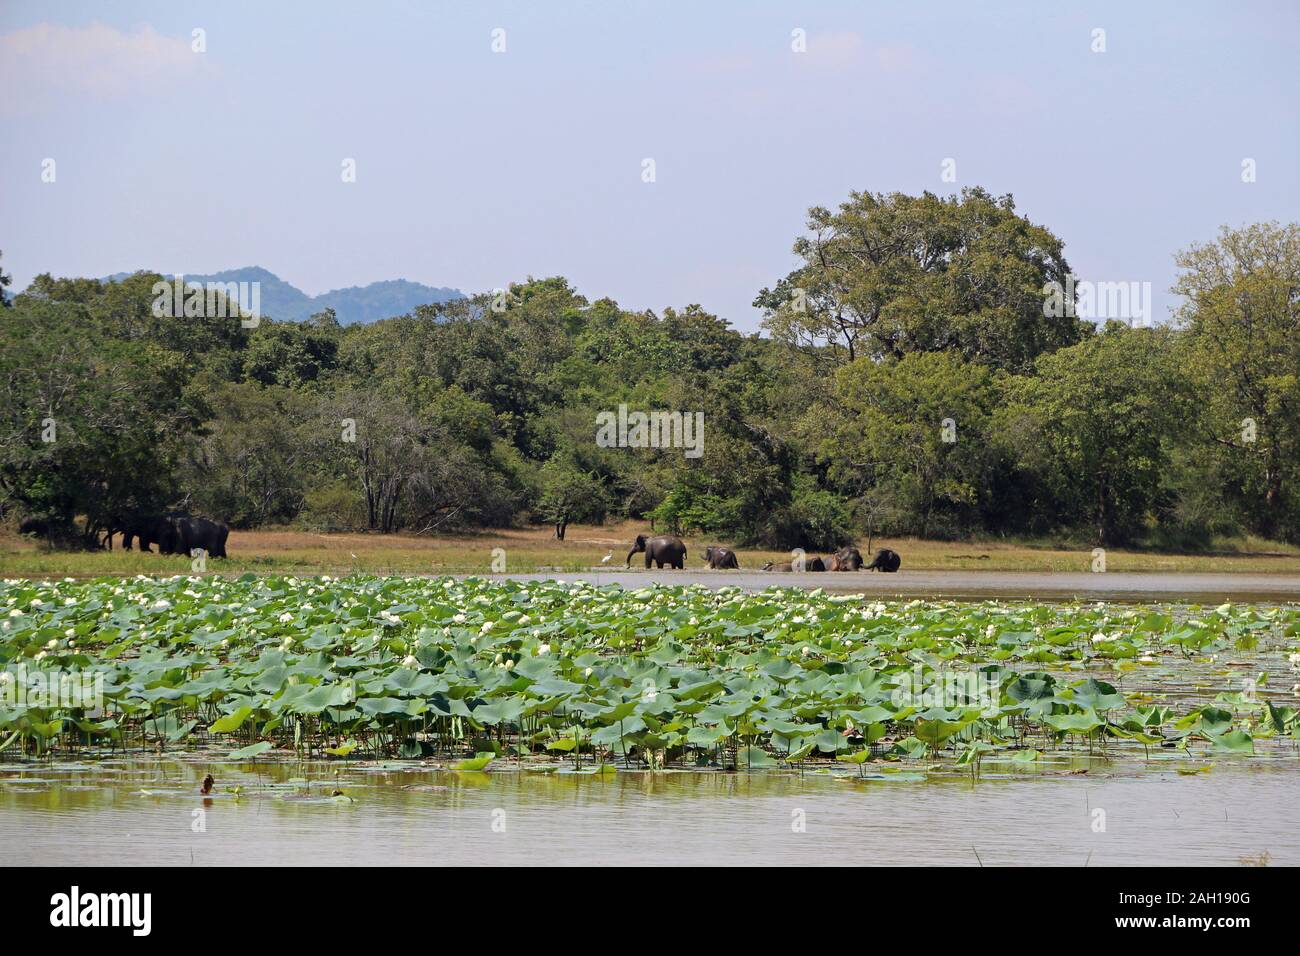 Water lilies with asia elephants in the background in Sri Lanka Stock Photo